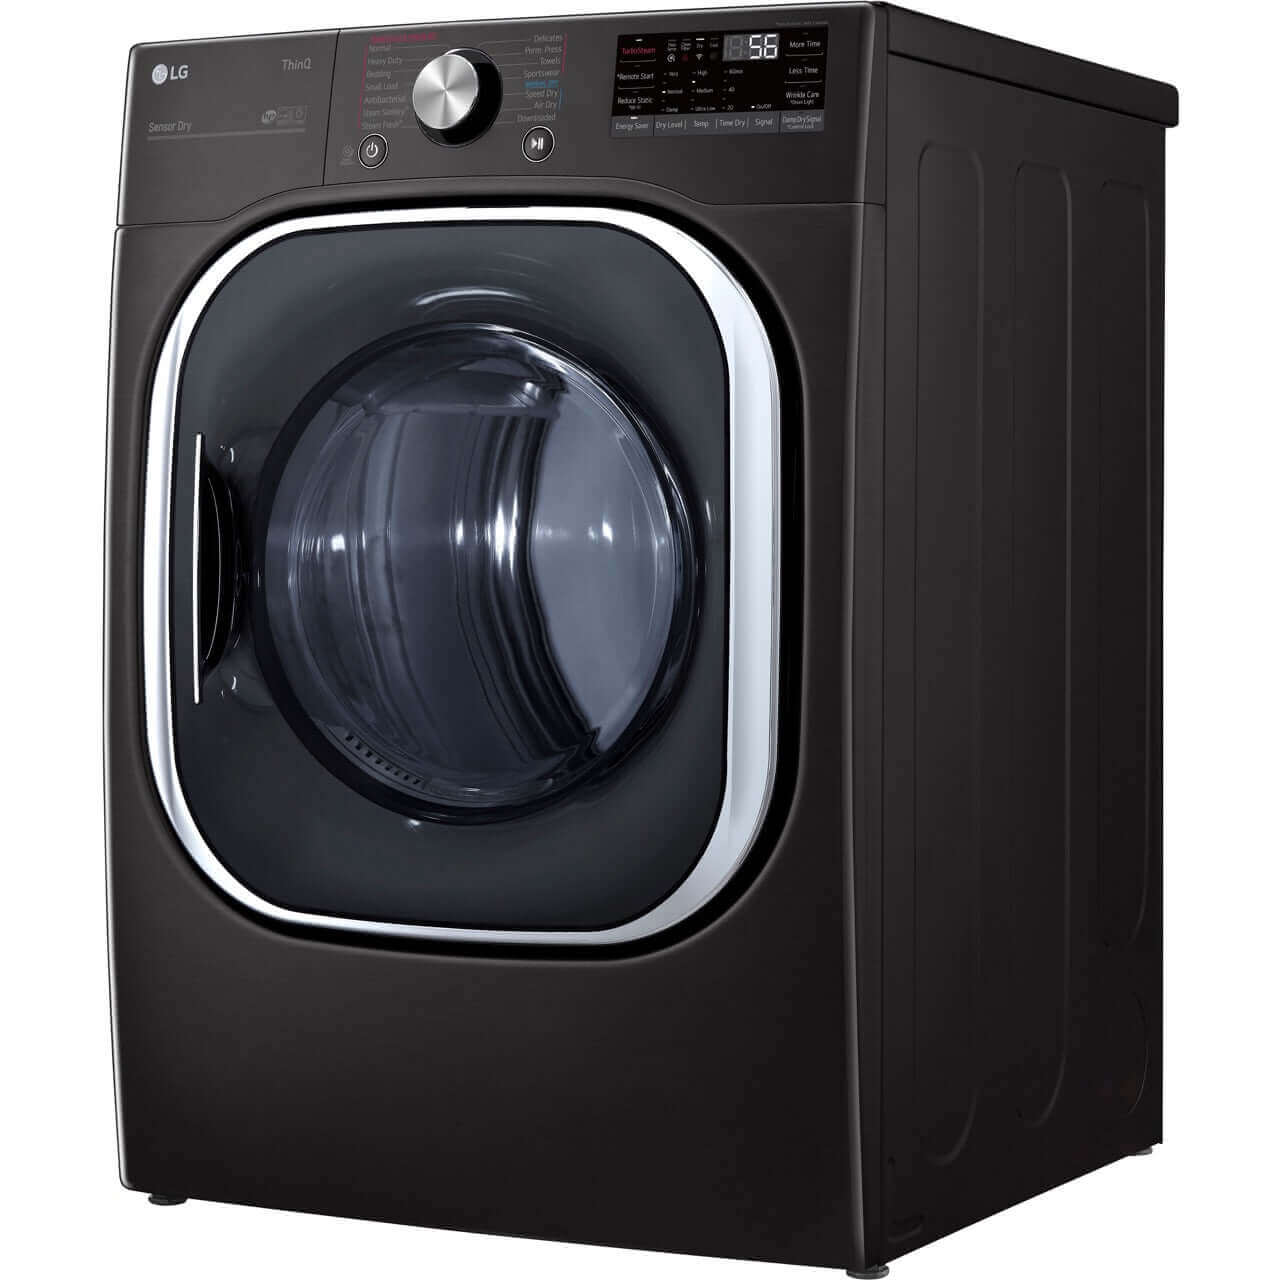 LG 27 In. 7.4-Cu. Ft. Electric Dryer with TurboSteam and Built-In Intelligence in Black Steel (DLEX4500B)